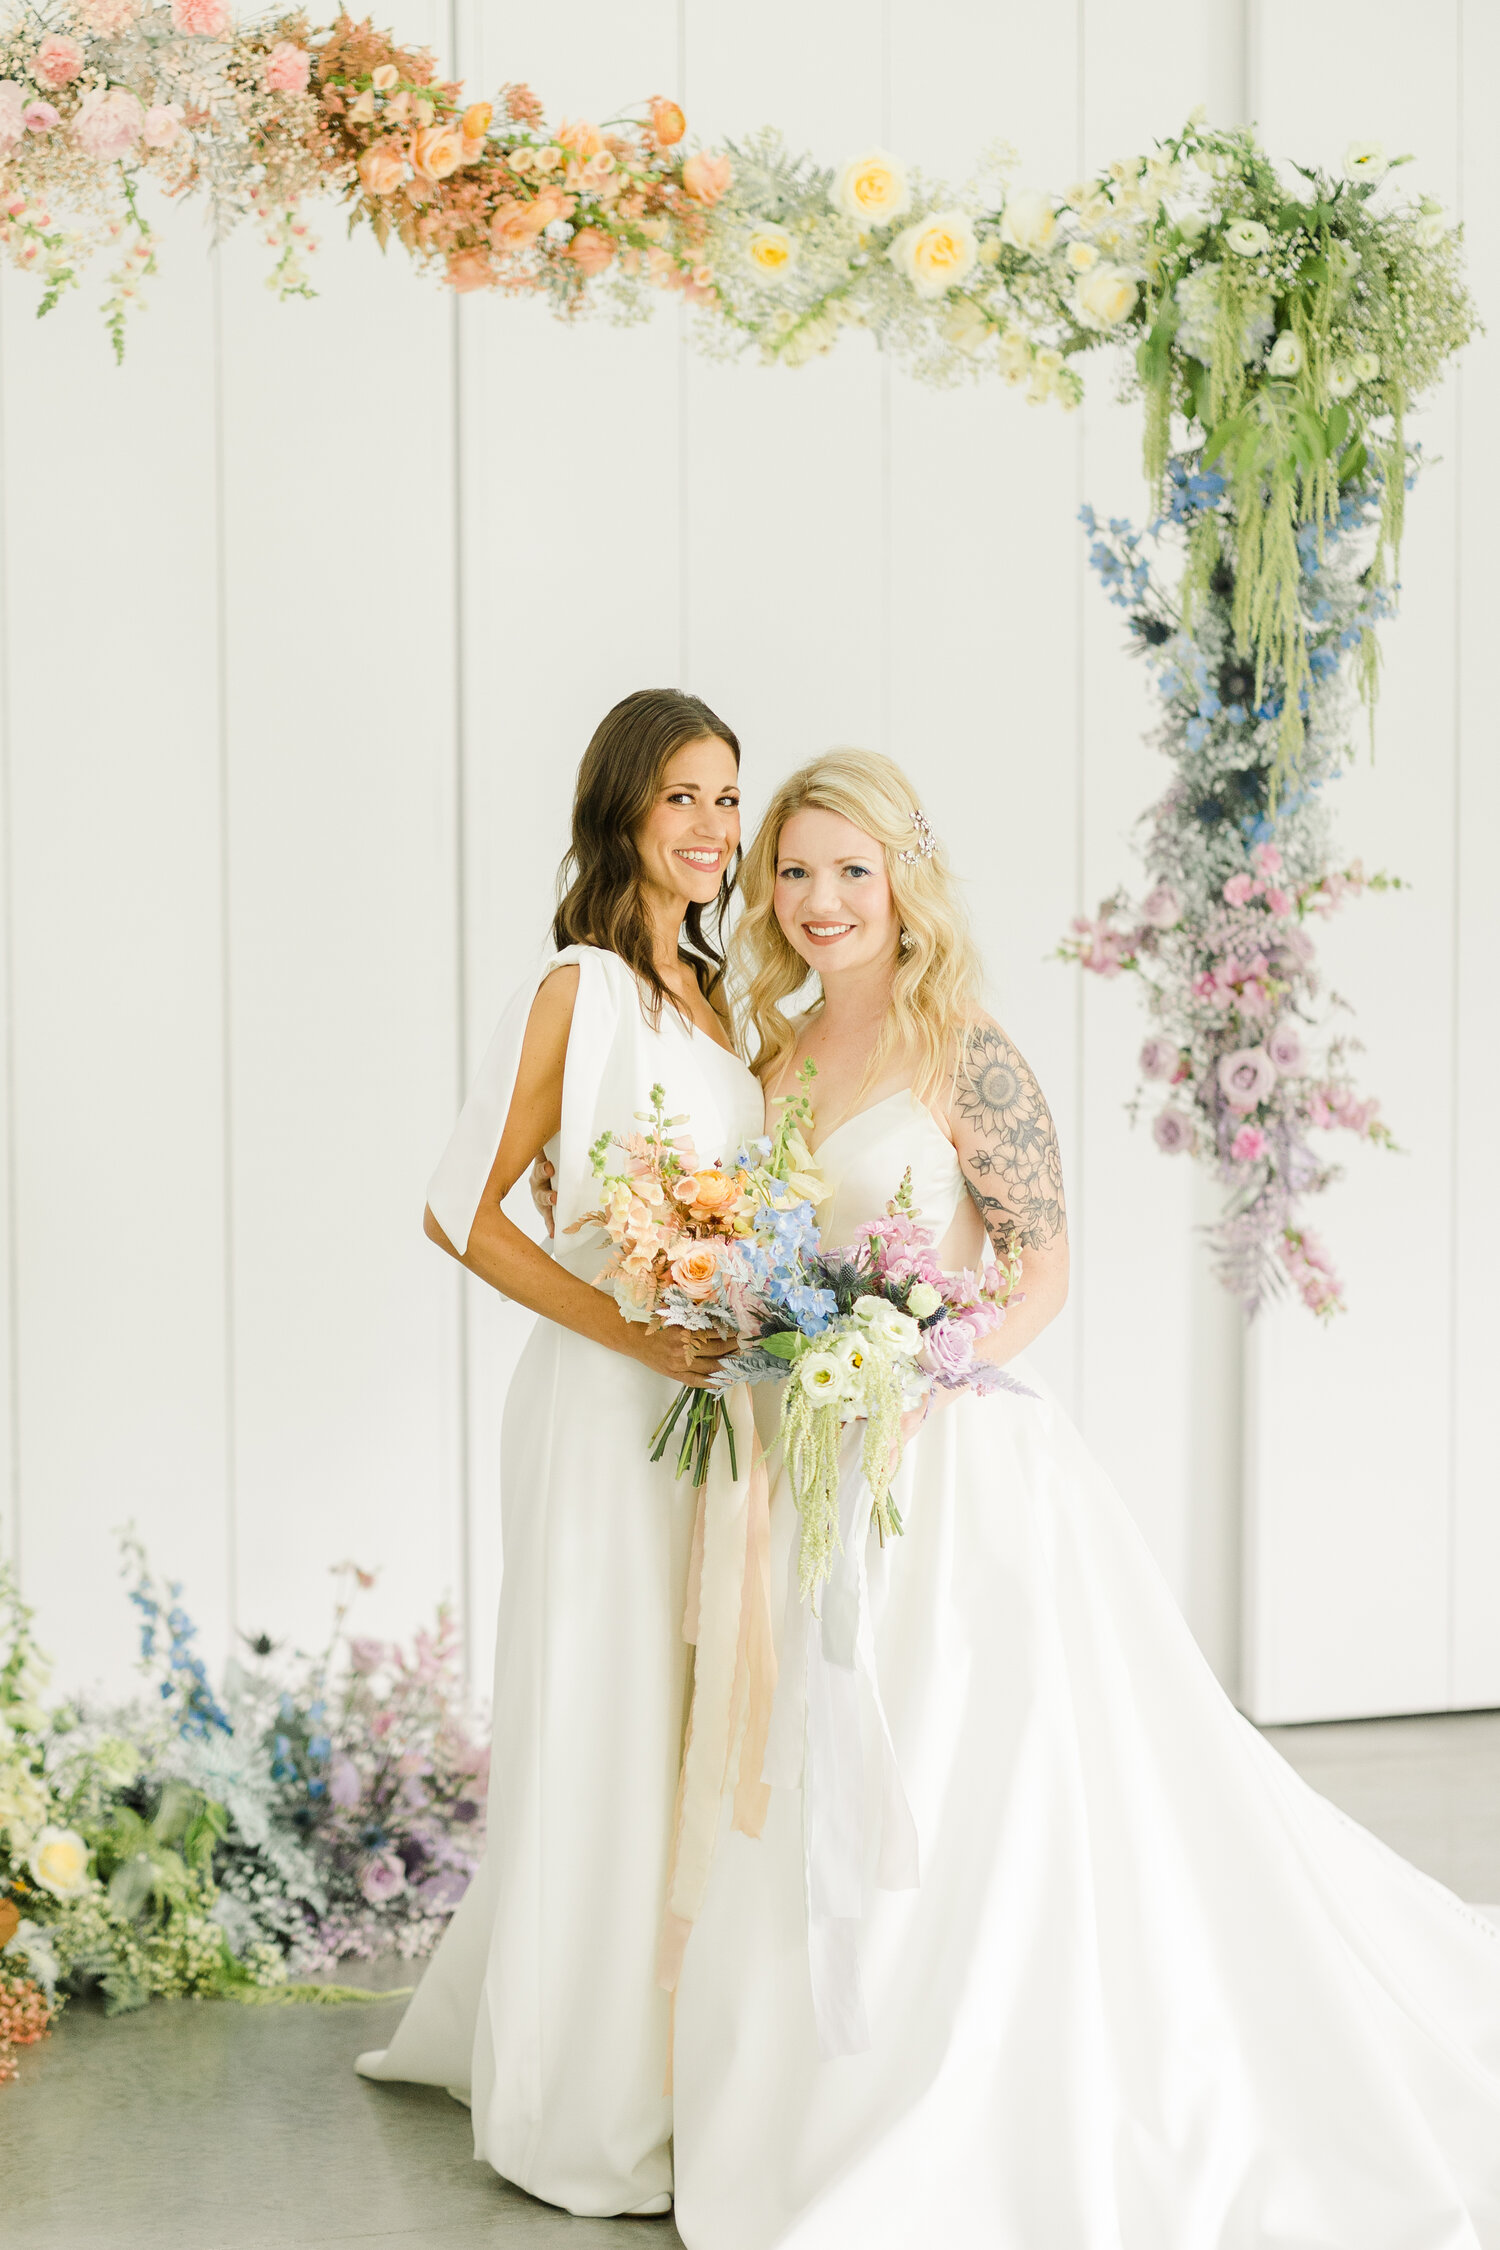 Bride and bride posing for couple portraits holding pastel florals. Bride on the left is wearing the Windham jumpsuit and the bride on the right is wearing Ines Di Santo Quice.